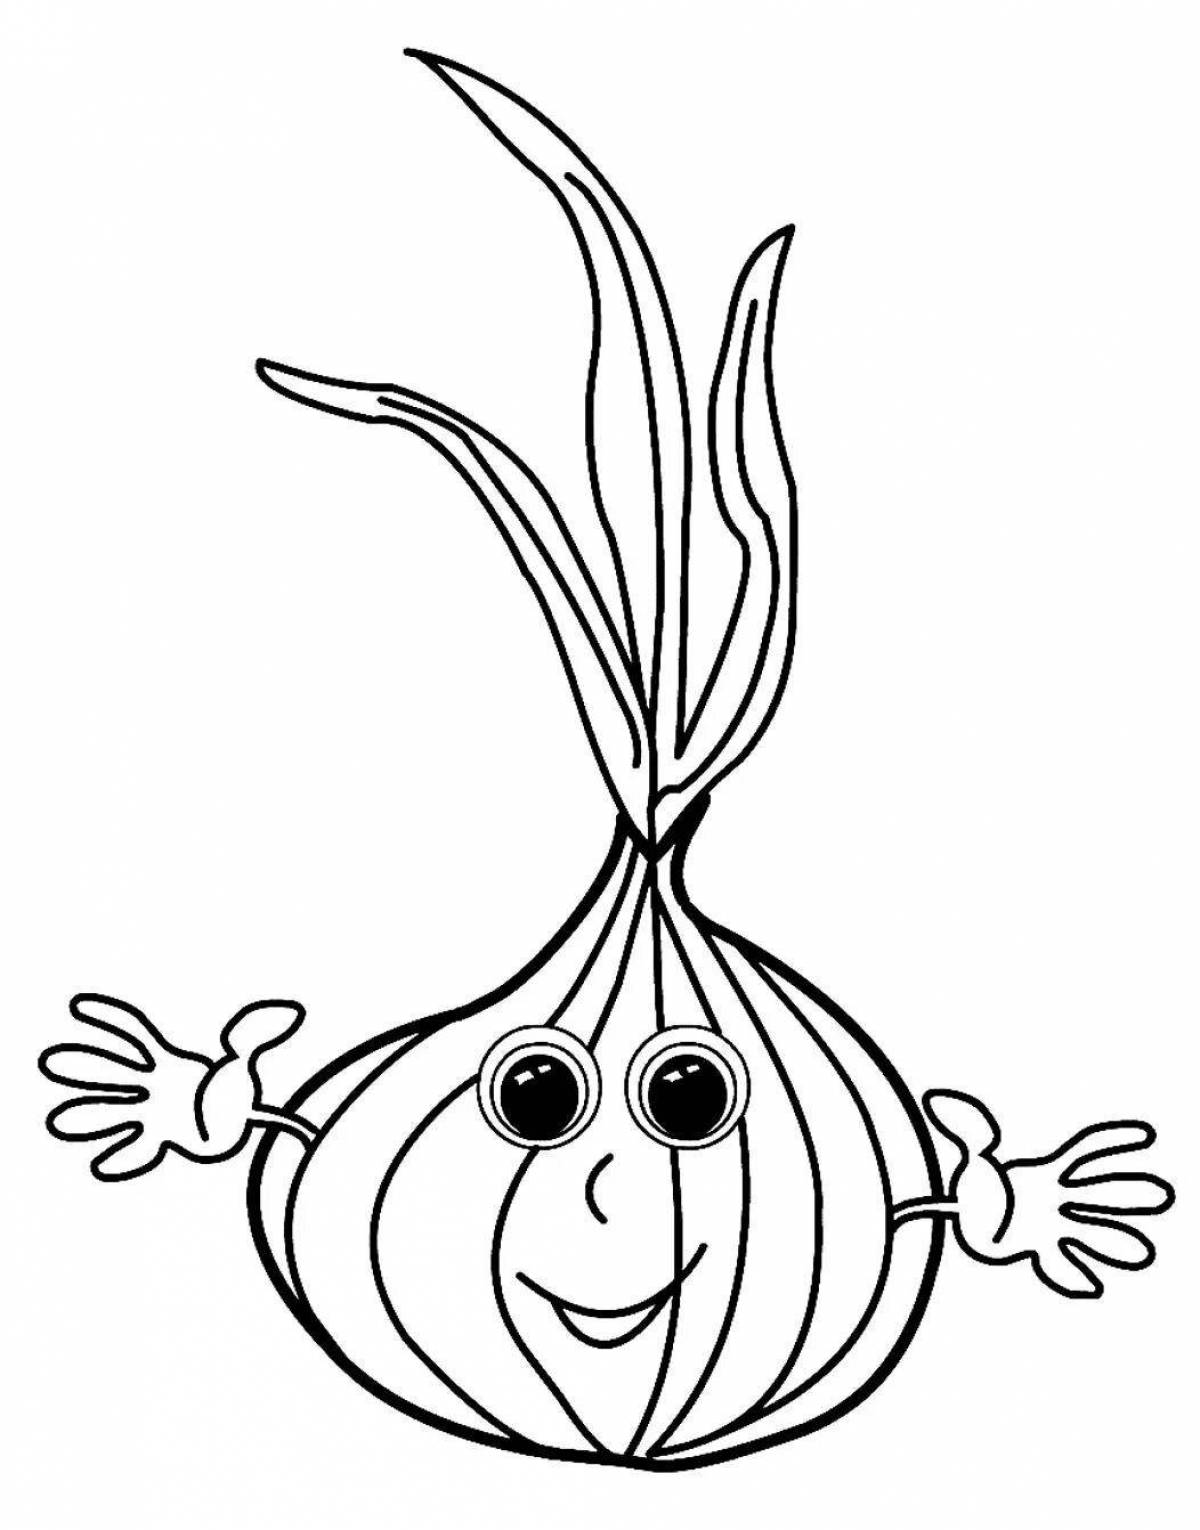 Dazzling green onion coloring page